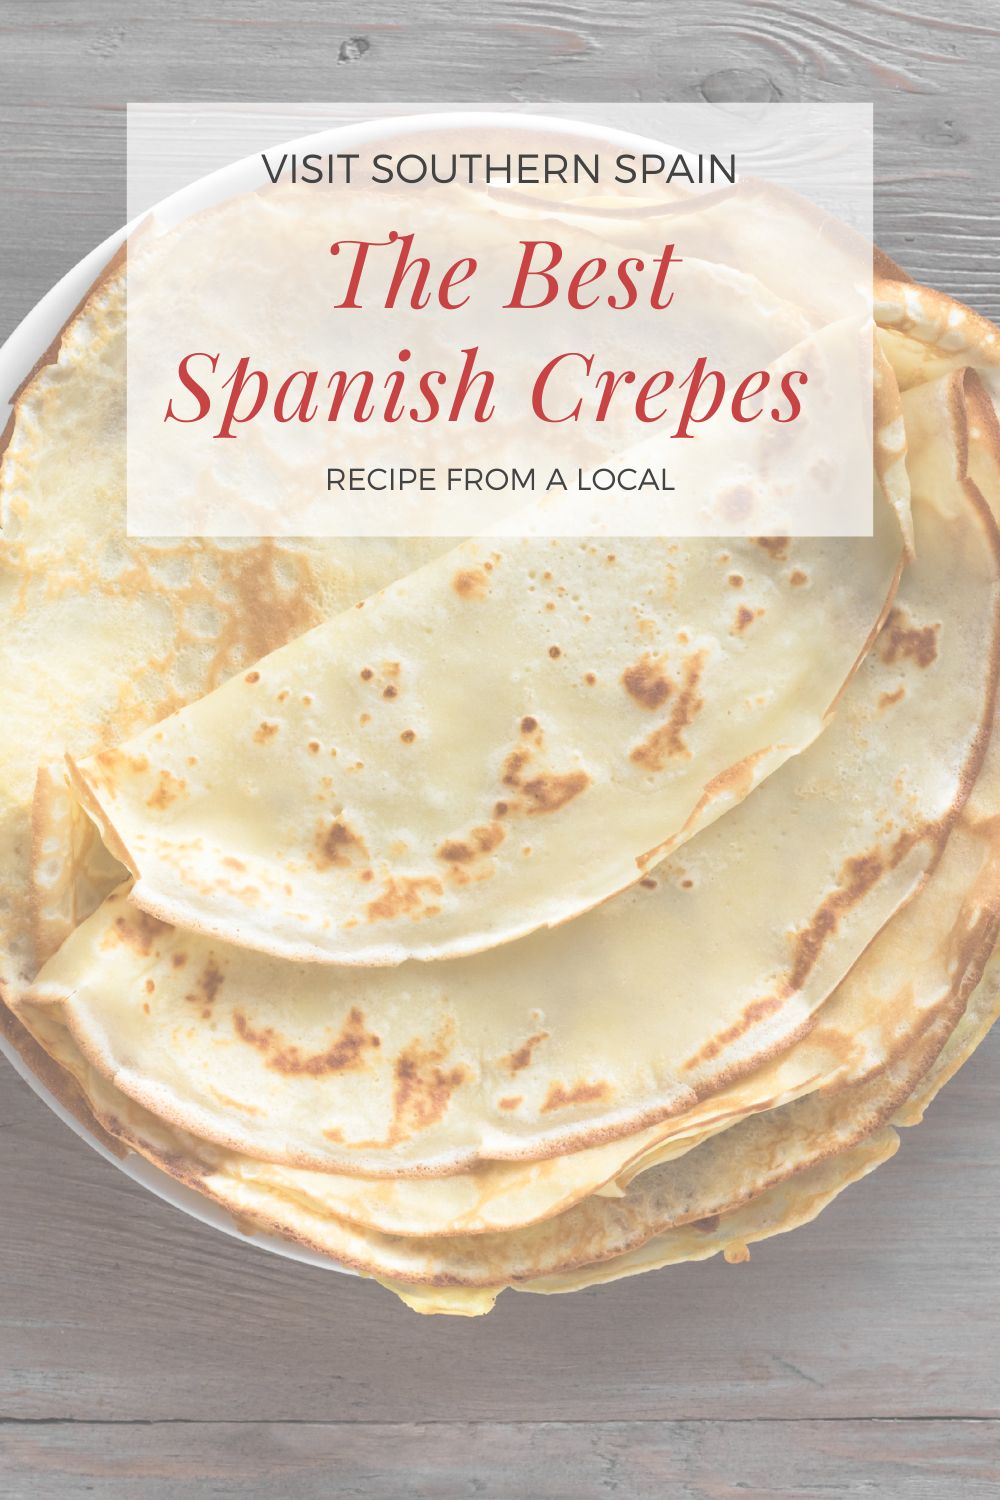 Are you looking for the best Spanish crepes recipe? These delicious Filloas are Spain's most beloved sweet crepes you'll fall in love with from the very first bite. The Spanish crepes recipe is easy to make and you can fill them with chocolate spread, dulce de leche, and fruit jams. Make this sweet crepe recipe for breakfast, lunch, or whenever you want a Hispanic dessert to bring back the memories from your last holiday in Spain. #spanishcrepes #crepesrecipe #spanishdesserts #crepesfromspain